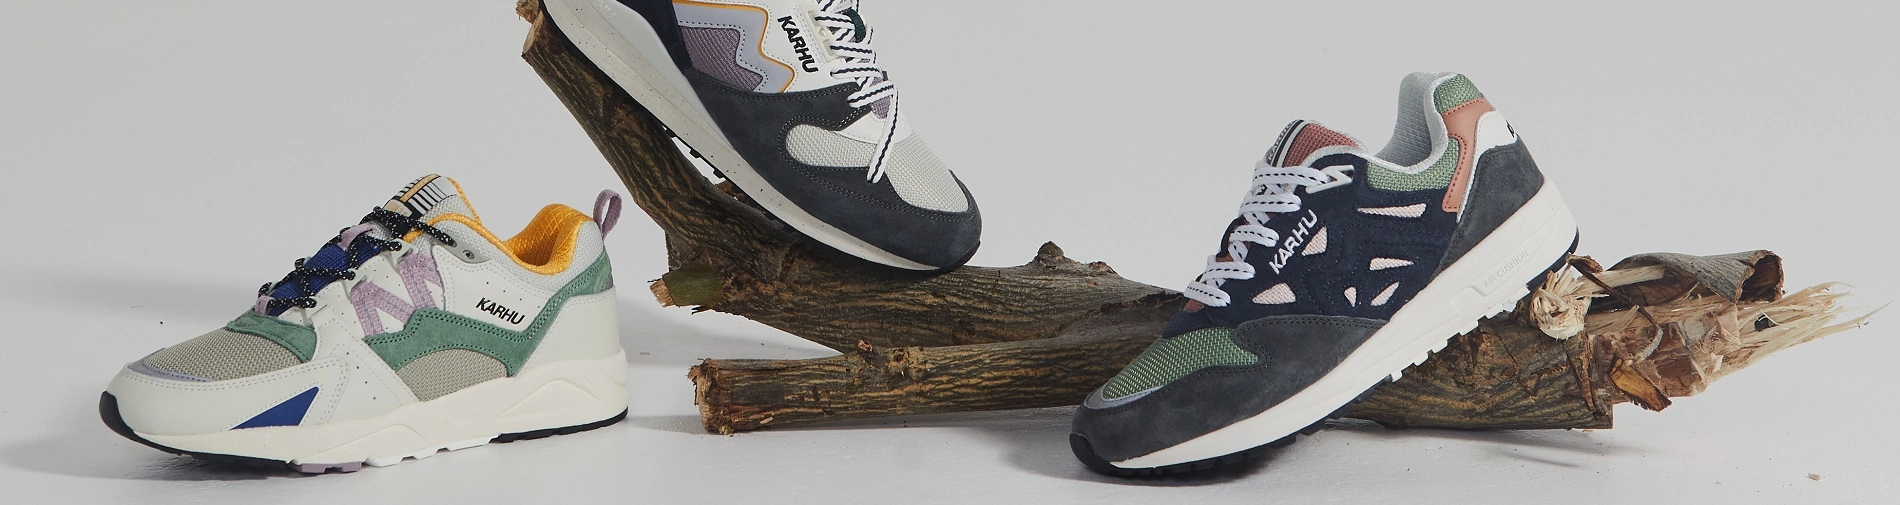 THE NEW KARHU COLLECTION IS ONLINE!